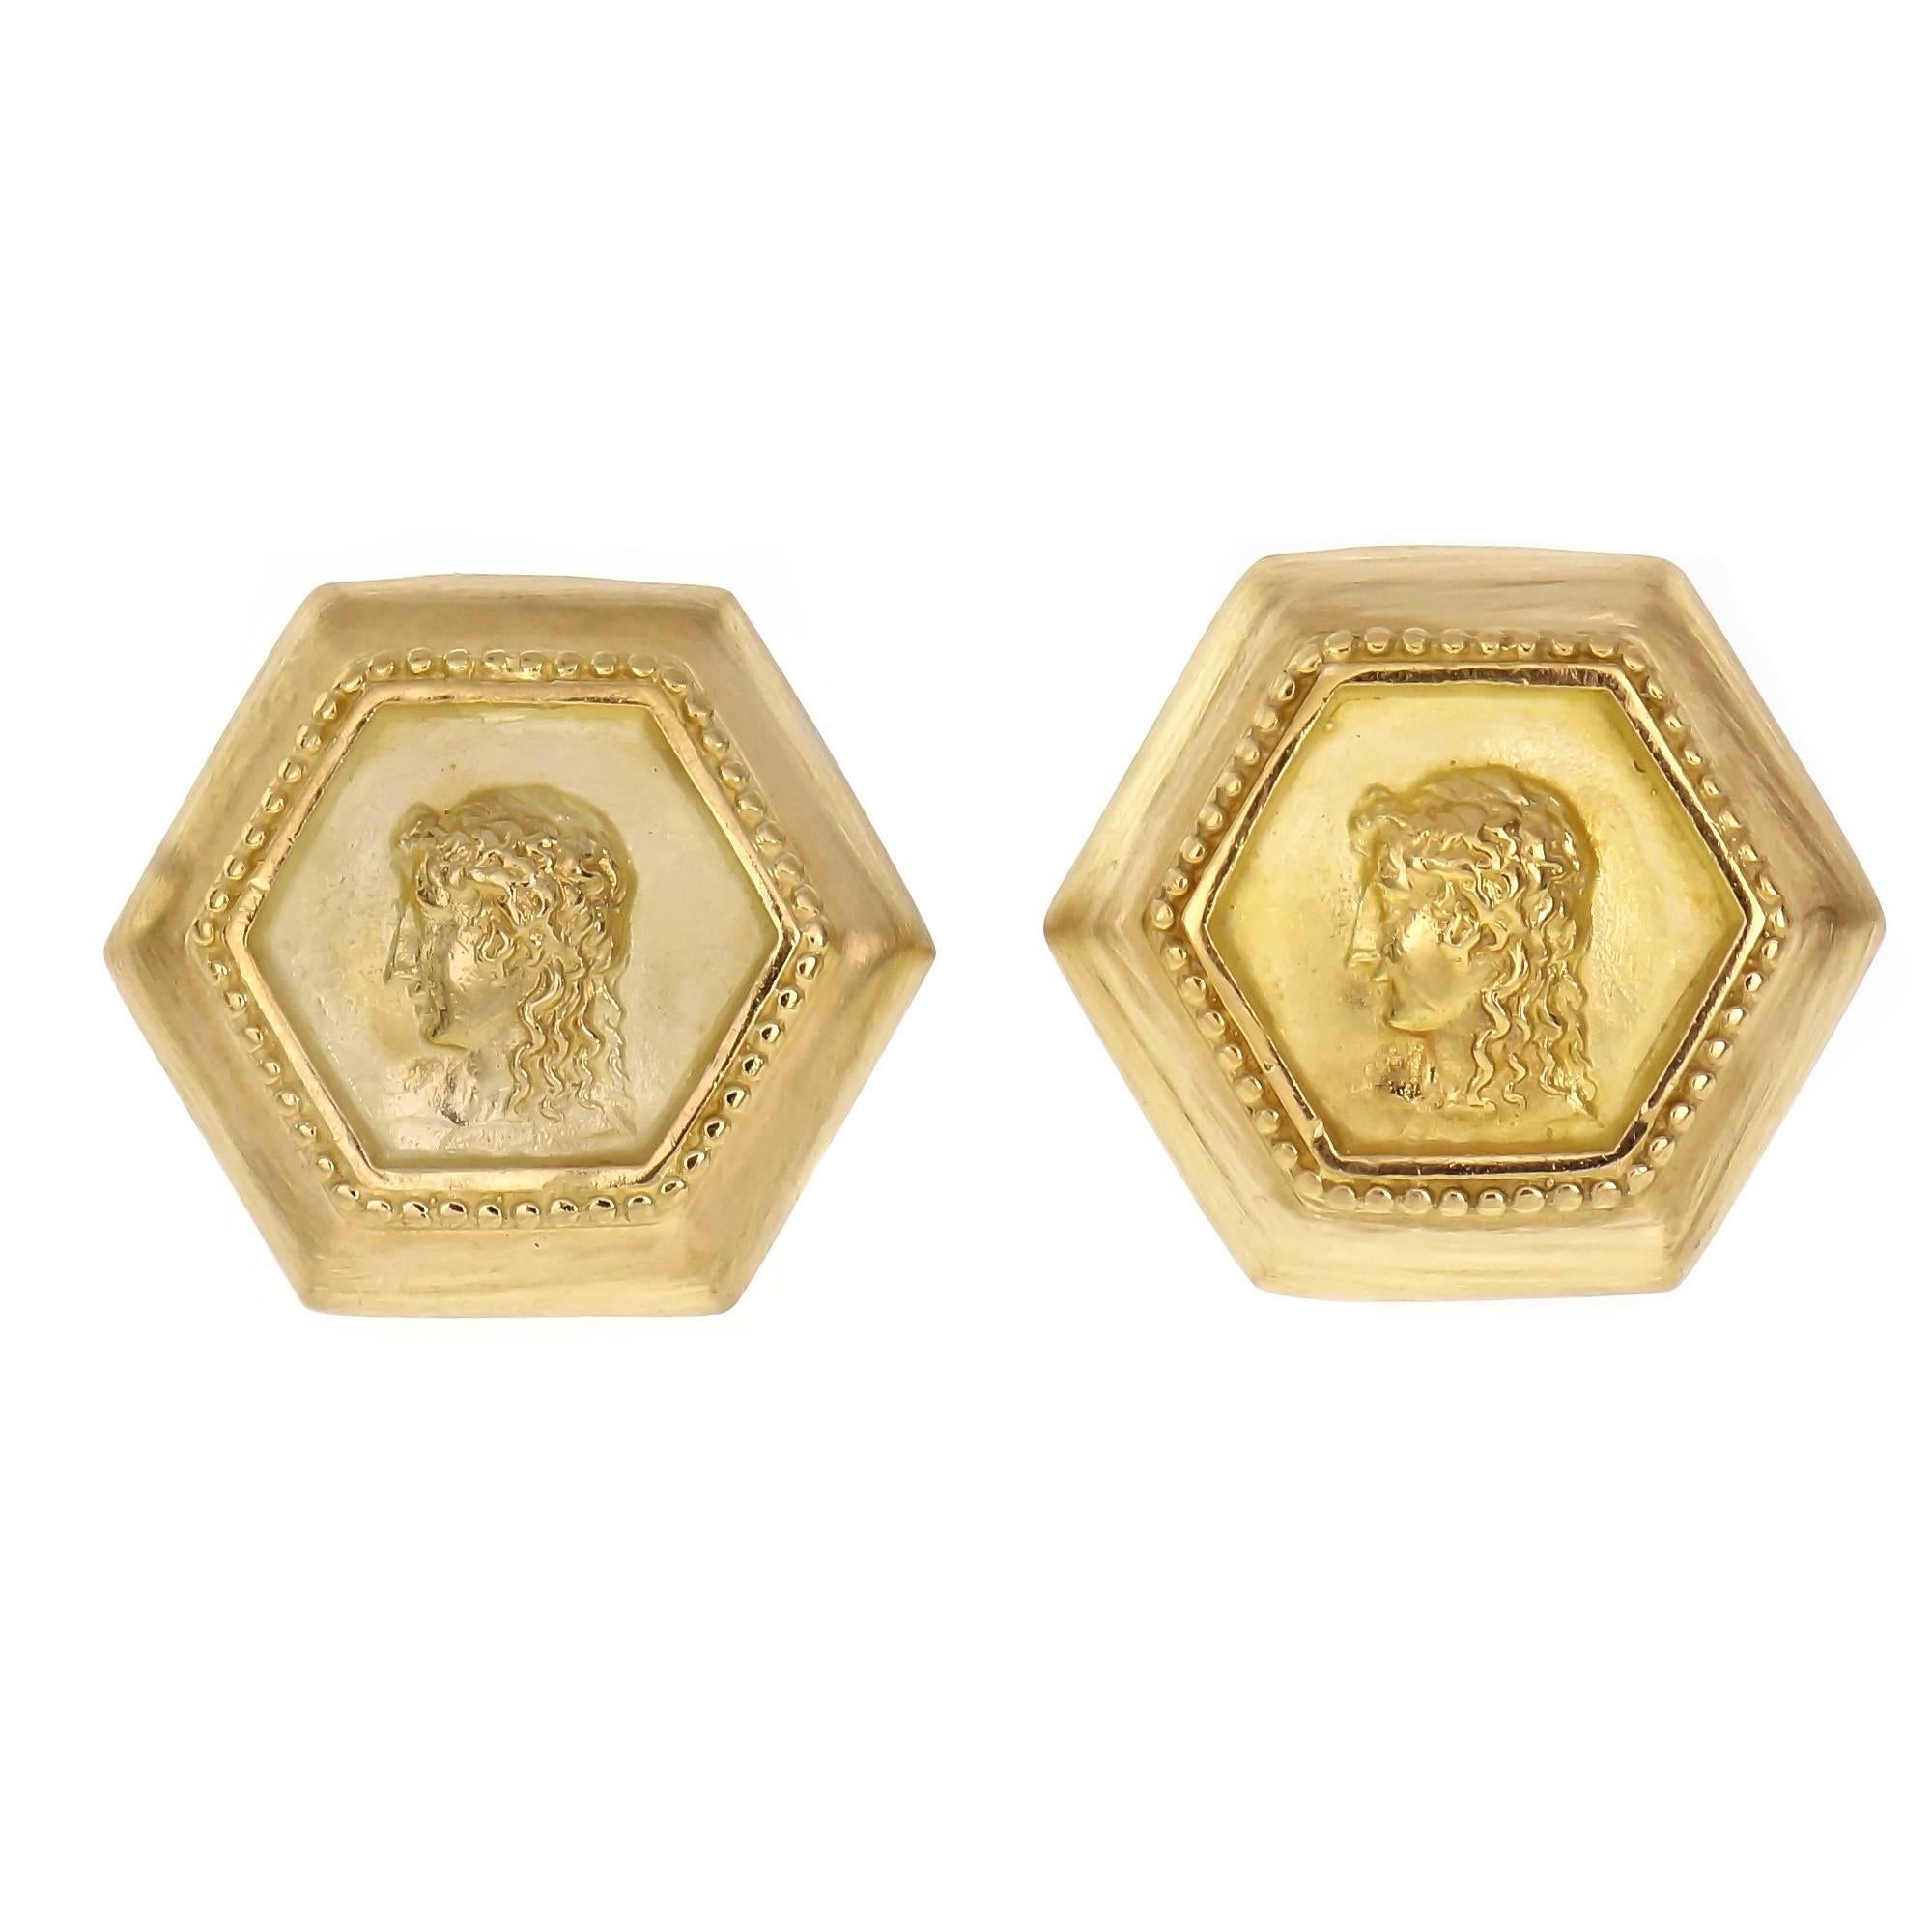 Authentic SeidenGang Athena Hexagon cufflinks in solid 18k yellow gold.

18l yellow gold
Tested and stamped:  18k
Hallmark: SG © Athena
23.1 grams
Top to bottom: 23.31mm or .92 inch
Width: 26.88mm or 1.06 inch
Depth: 7.91mm
